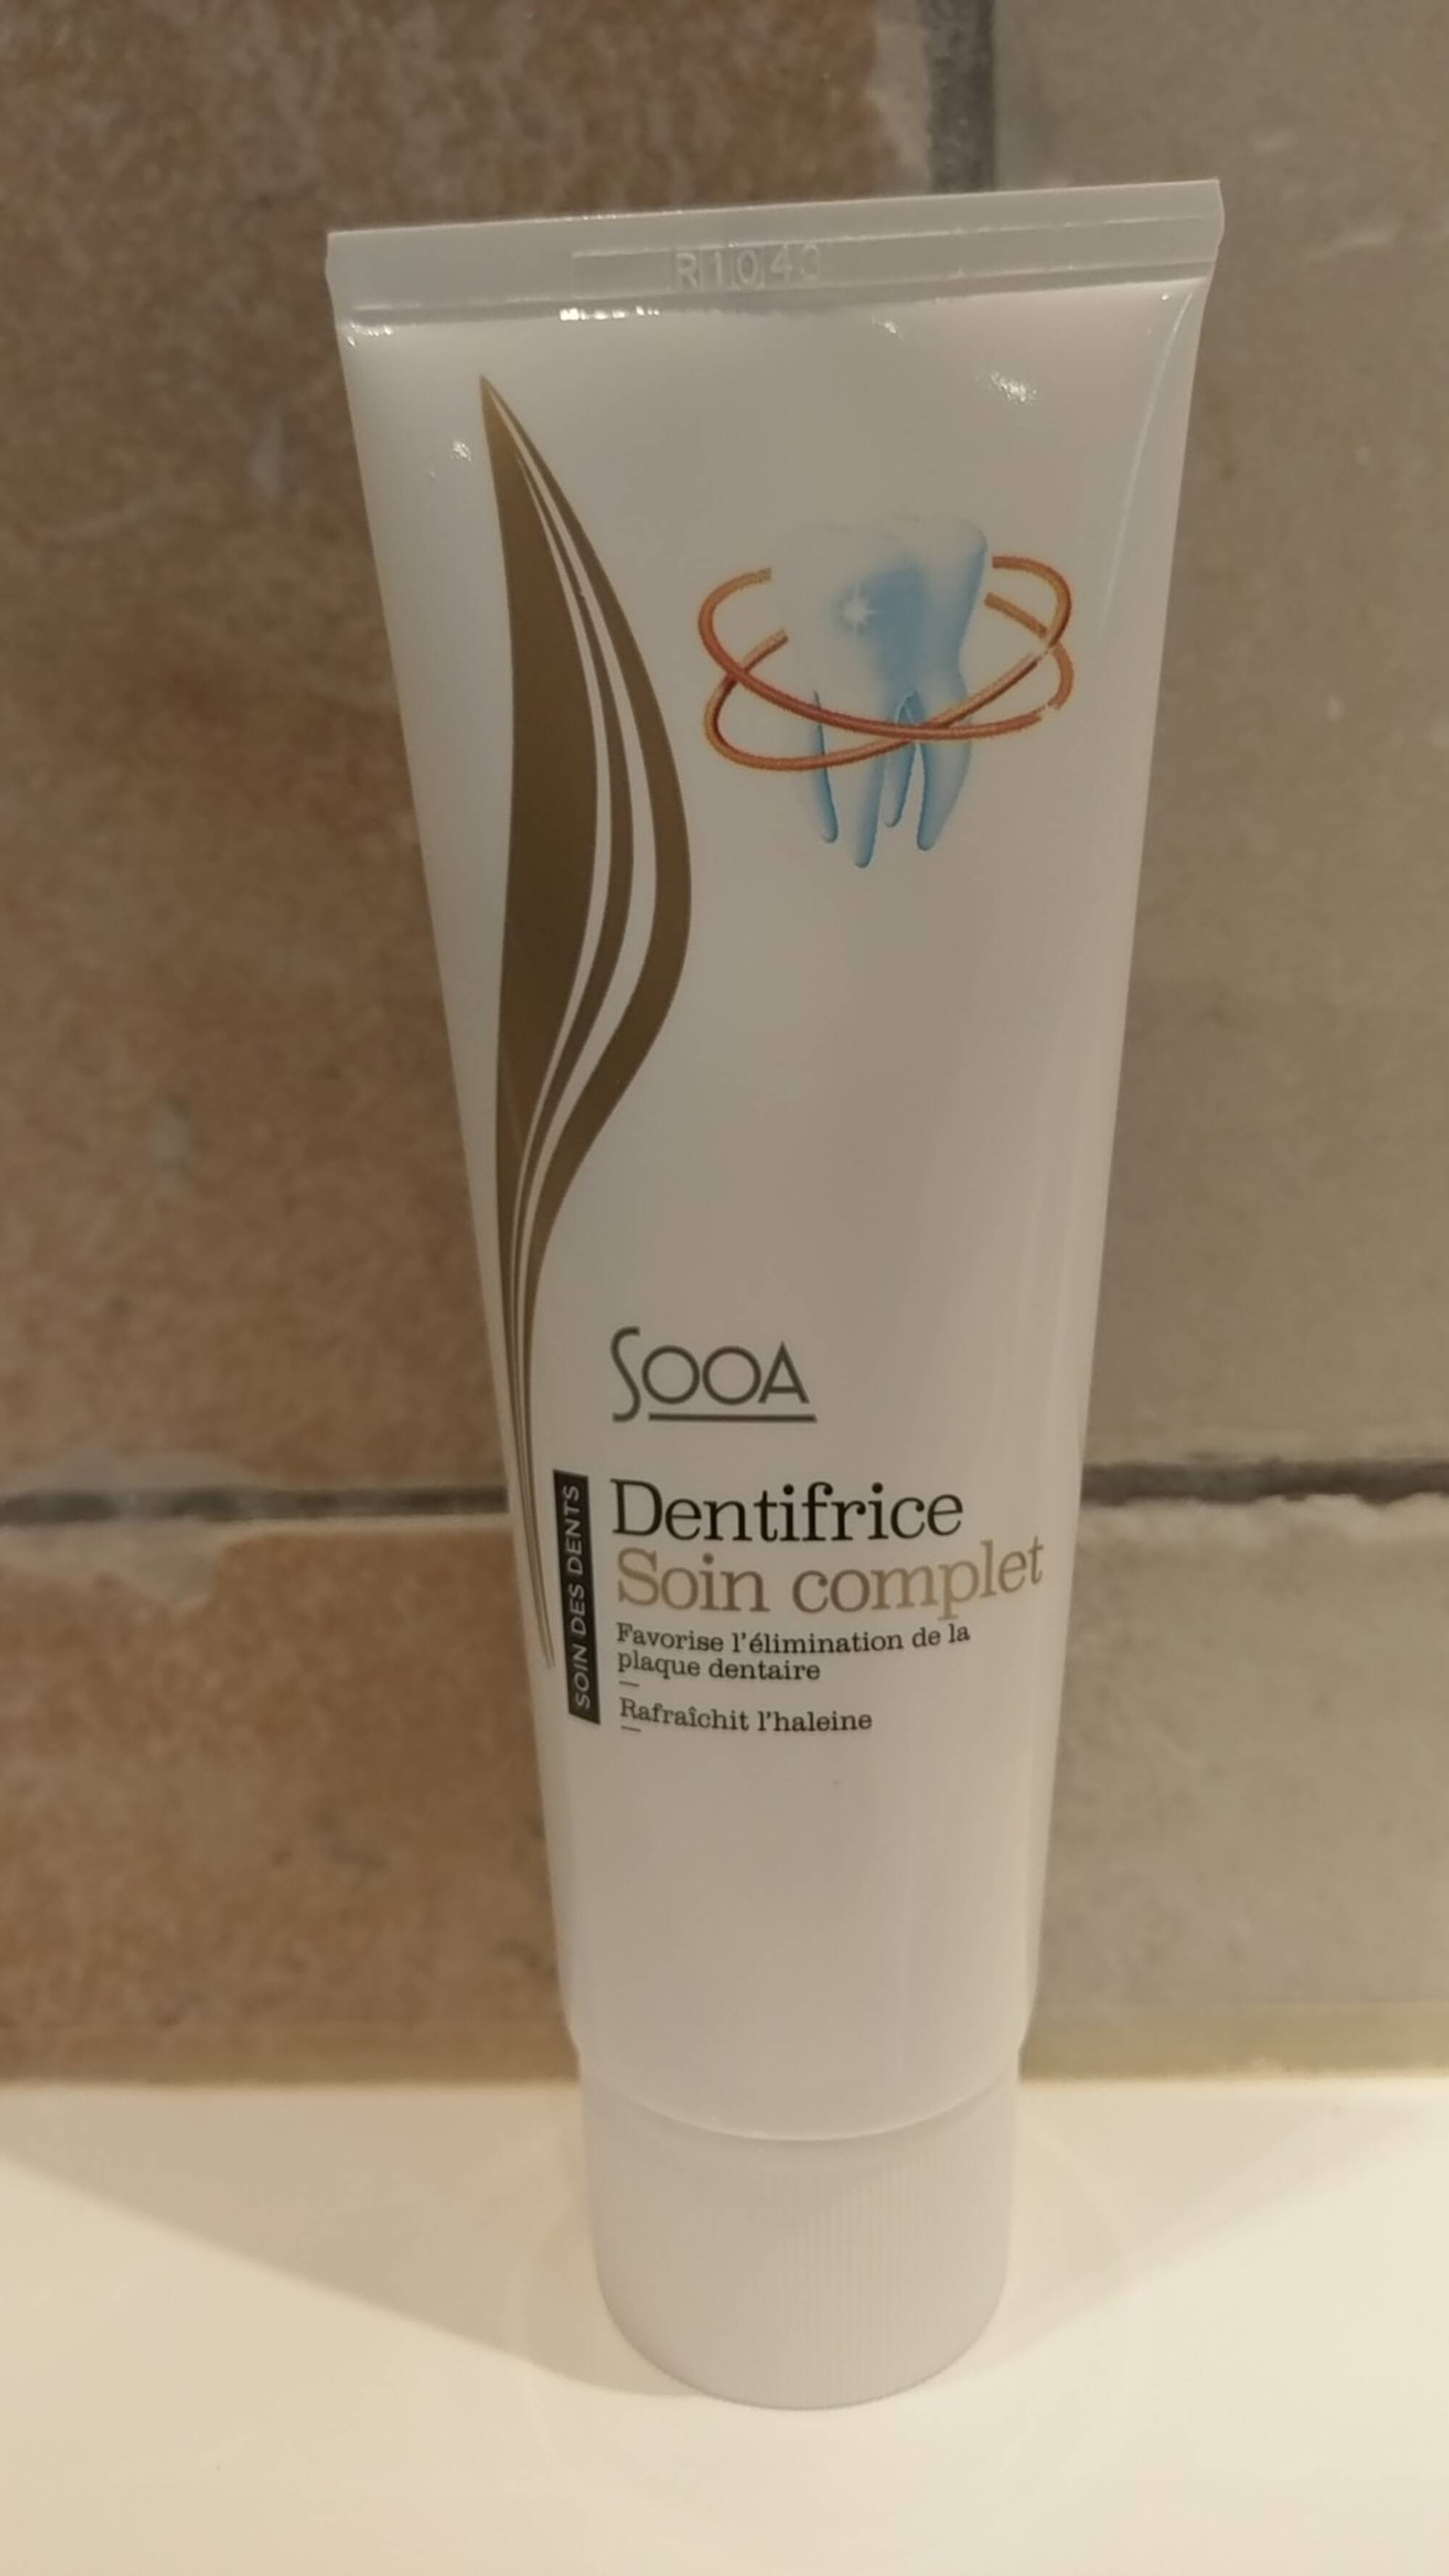 SOOA - Dentifrice soin complet